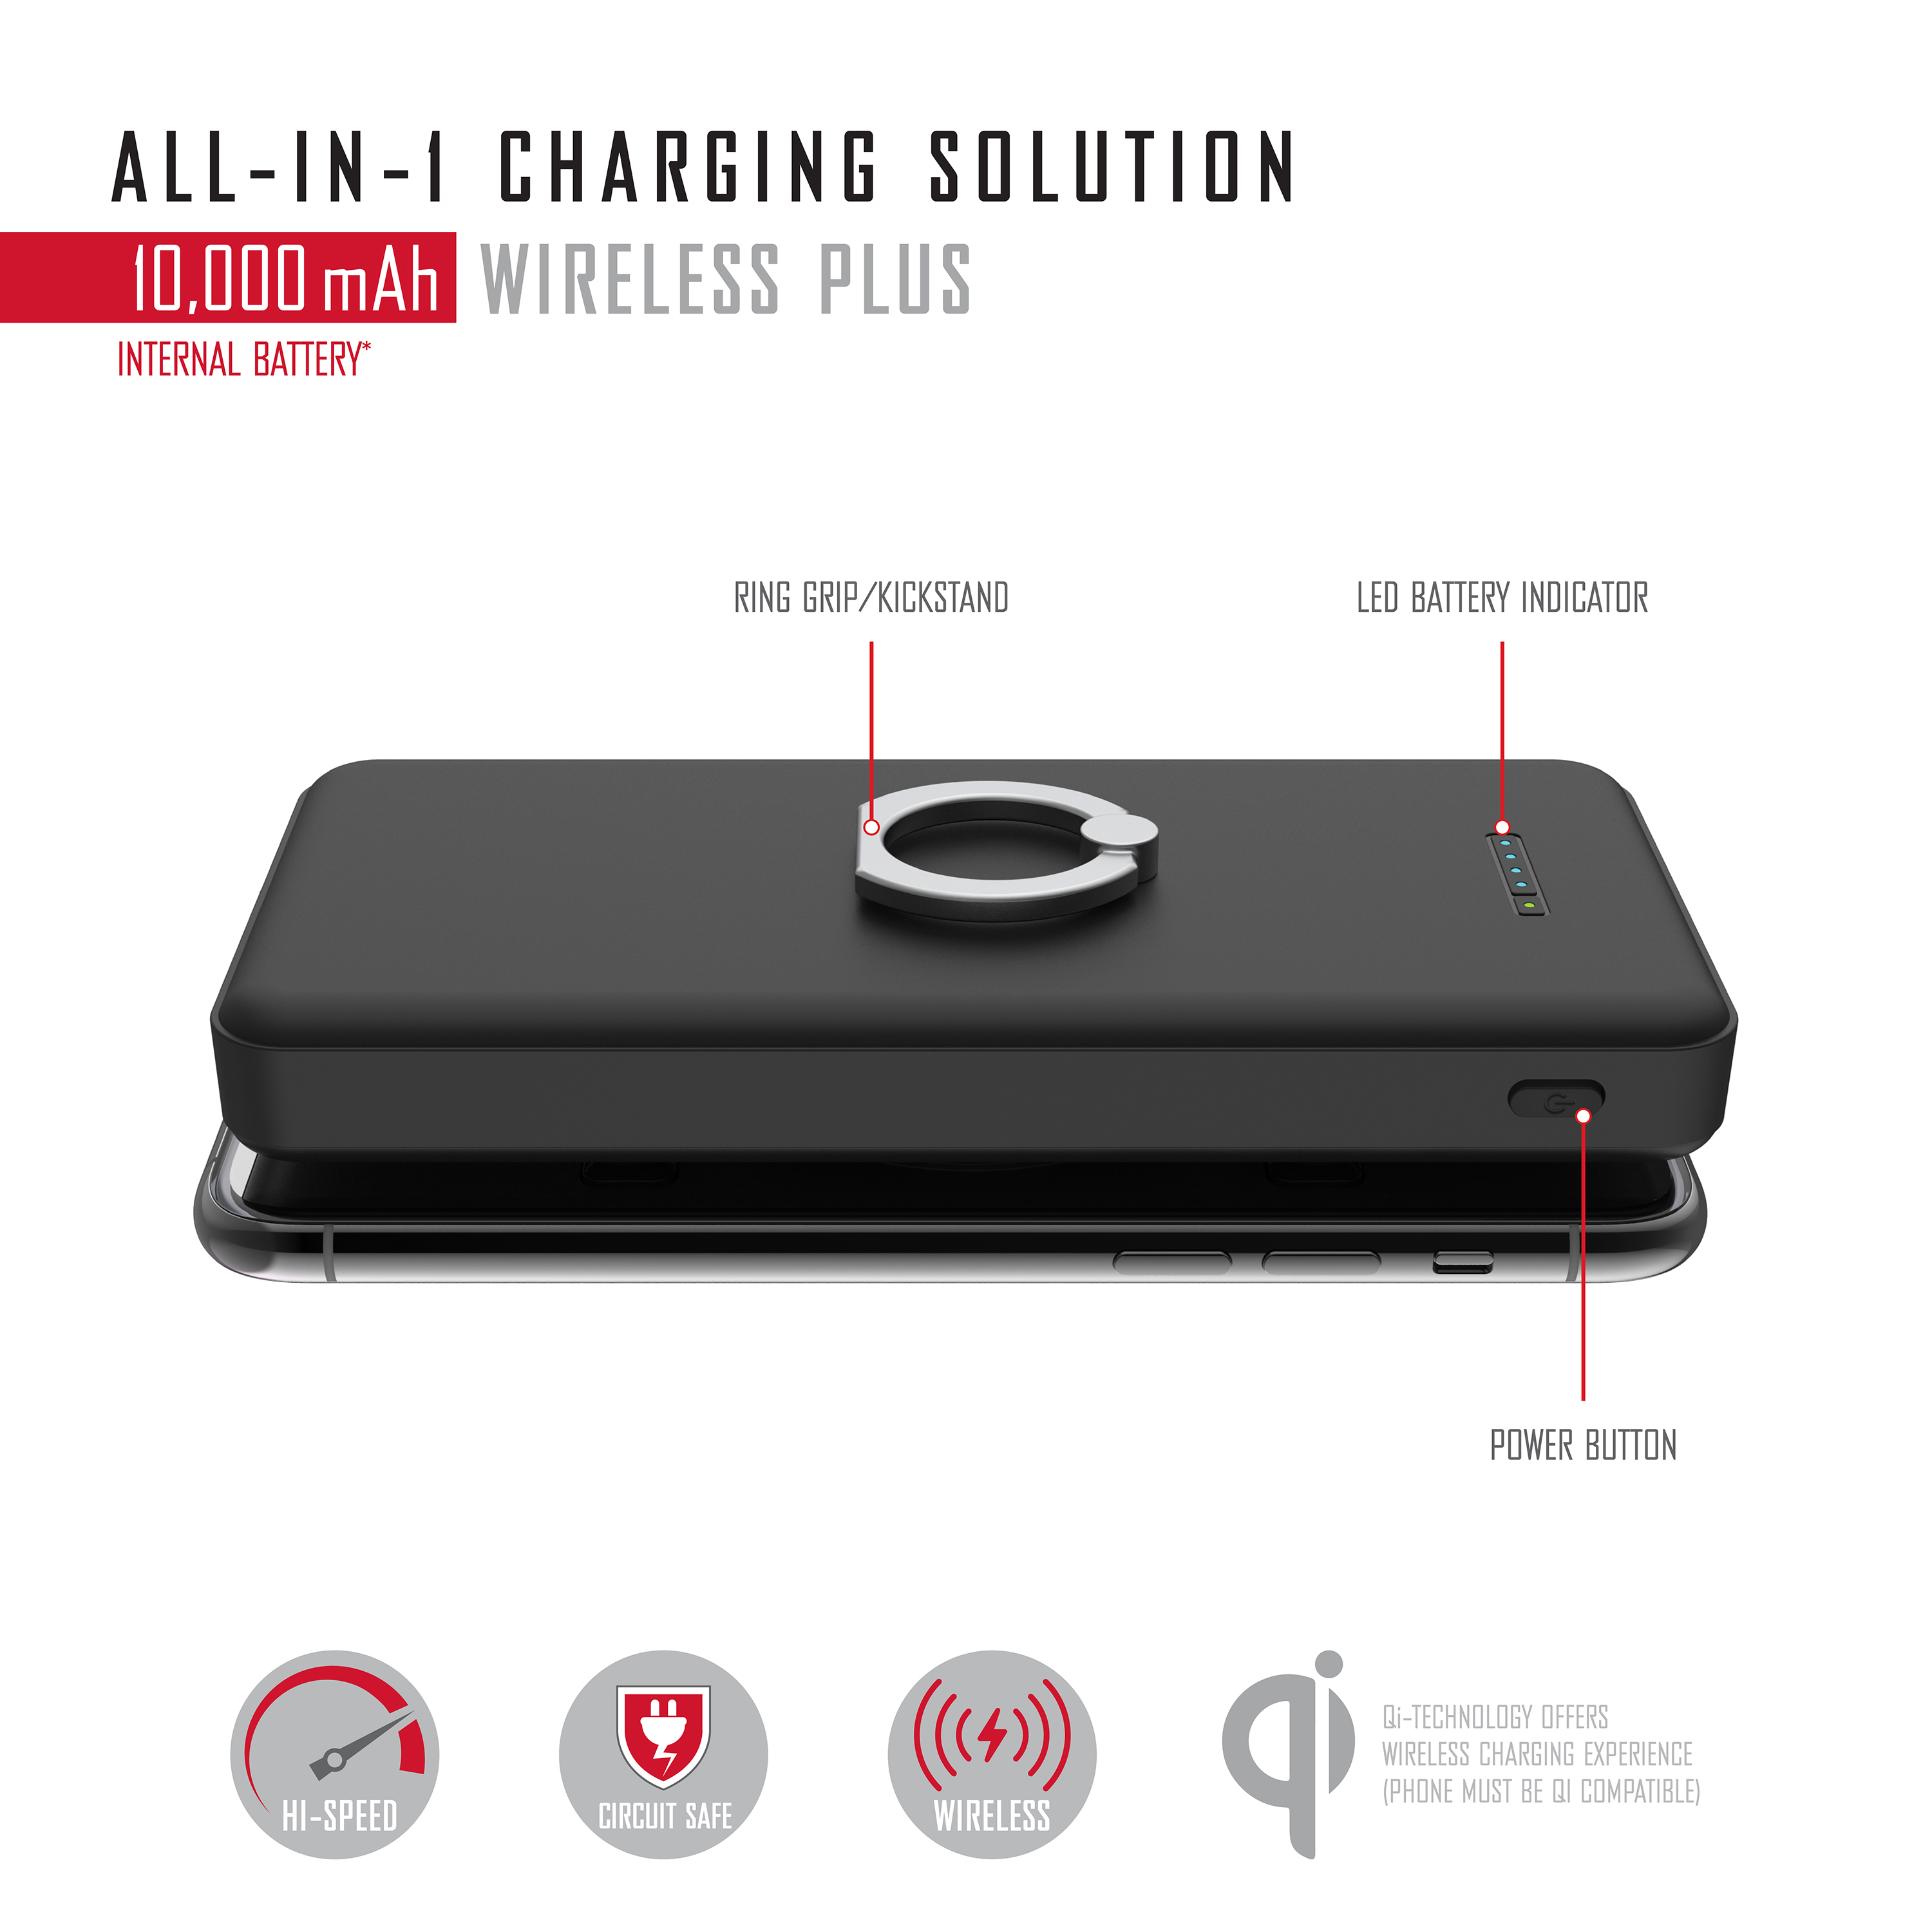 Pocket Juice 10K Plus, 3-in-1 10,000mAh Portable Charger with High-Speed Wireless Charging, Black - image 2 of 8